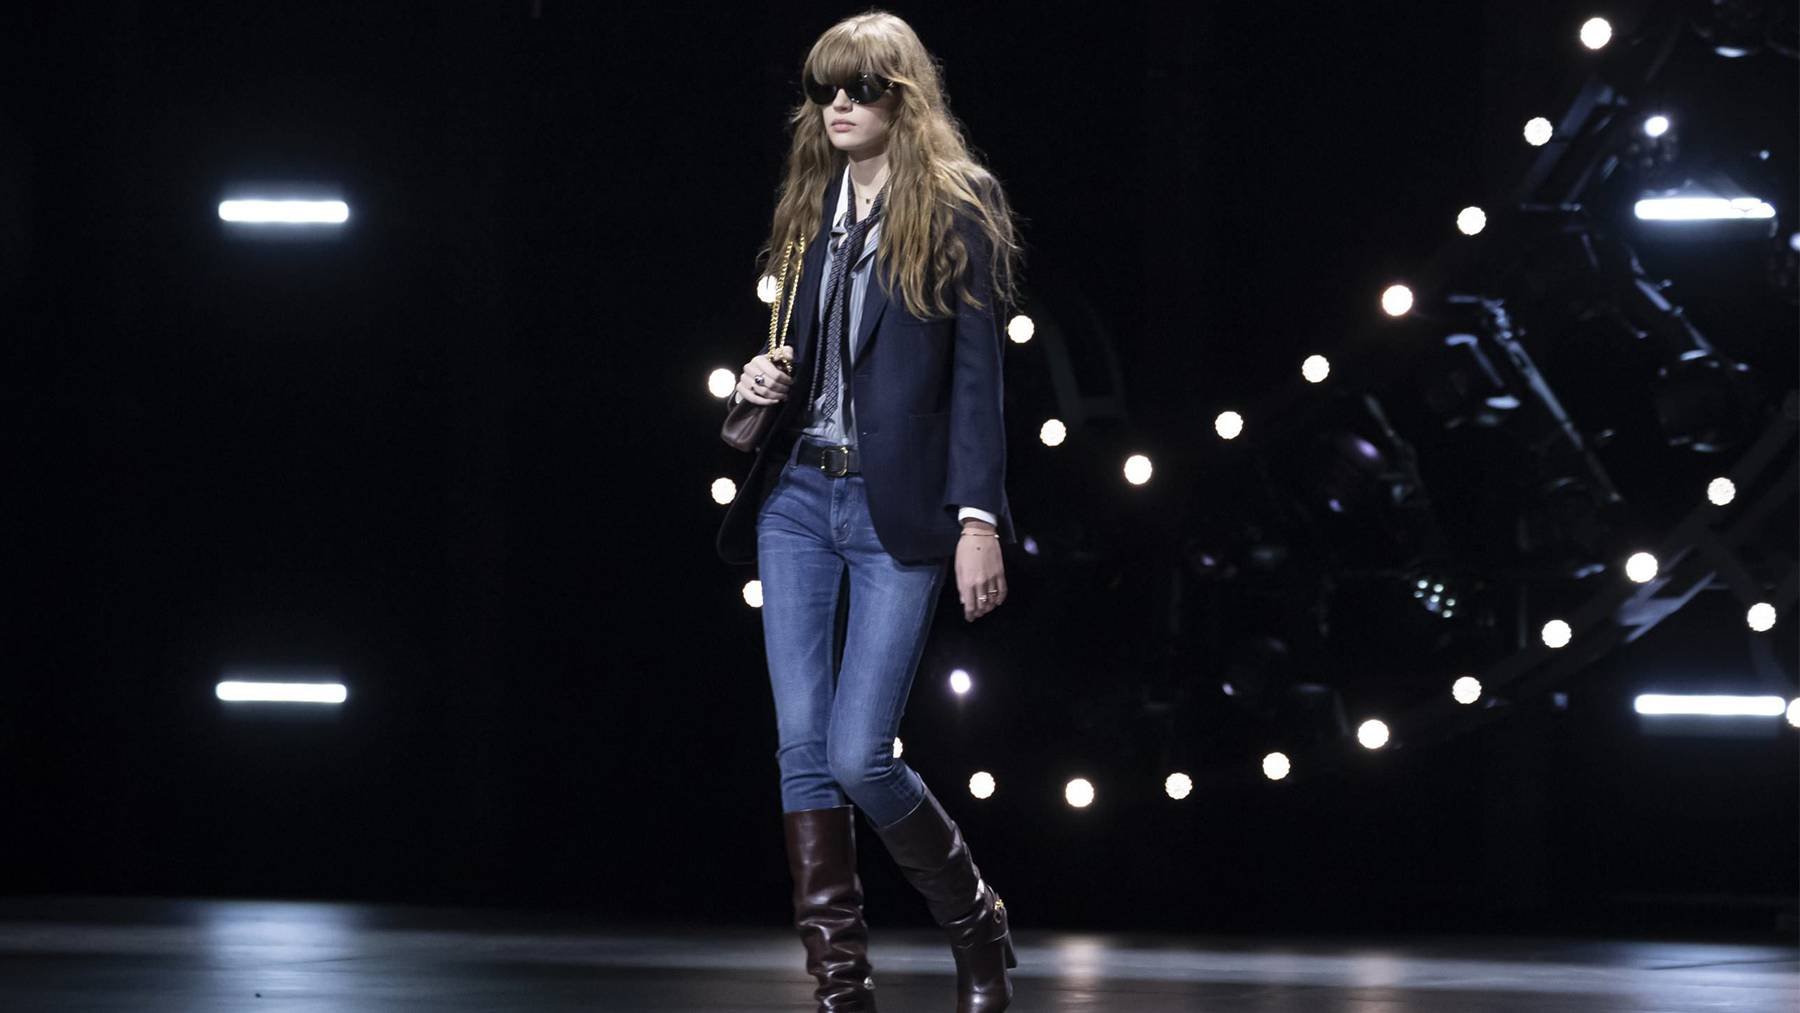 A Runway Show at LVMH's Celine Just Shifted Luxury's Landscape - Bloomberg